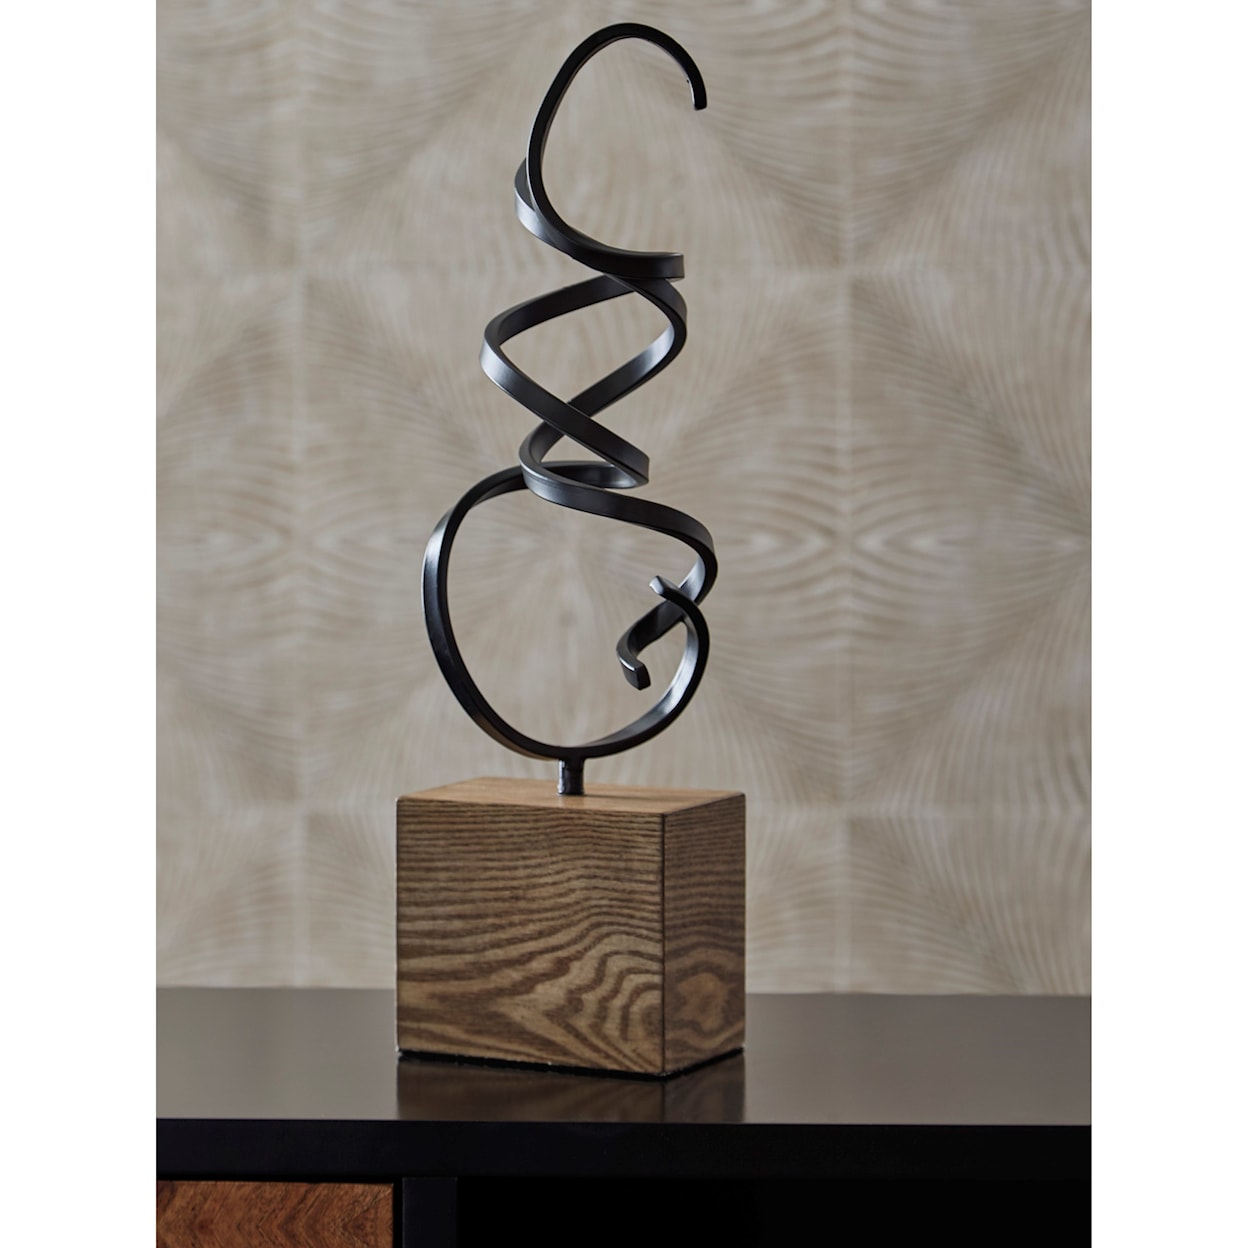 Signature Design by Ashley Accents Ruthland Black/Brown Sculpture